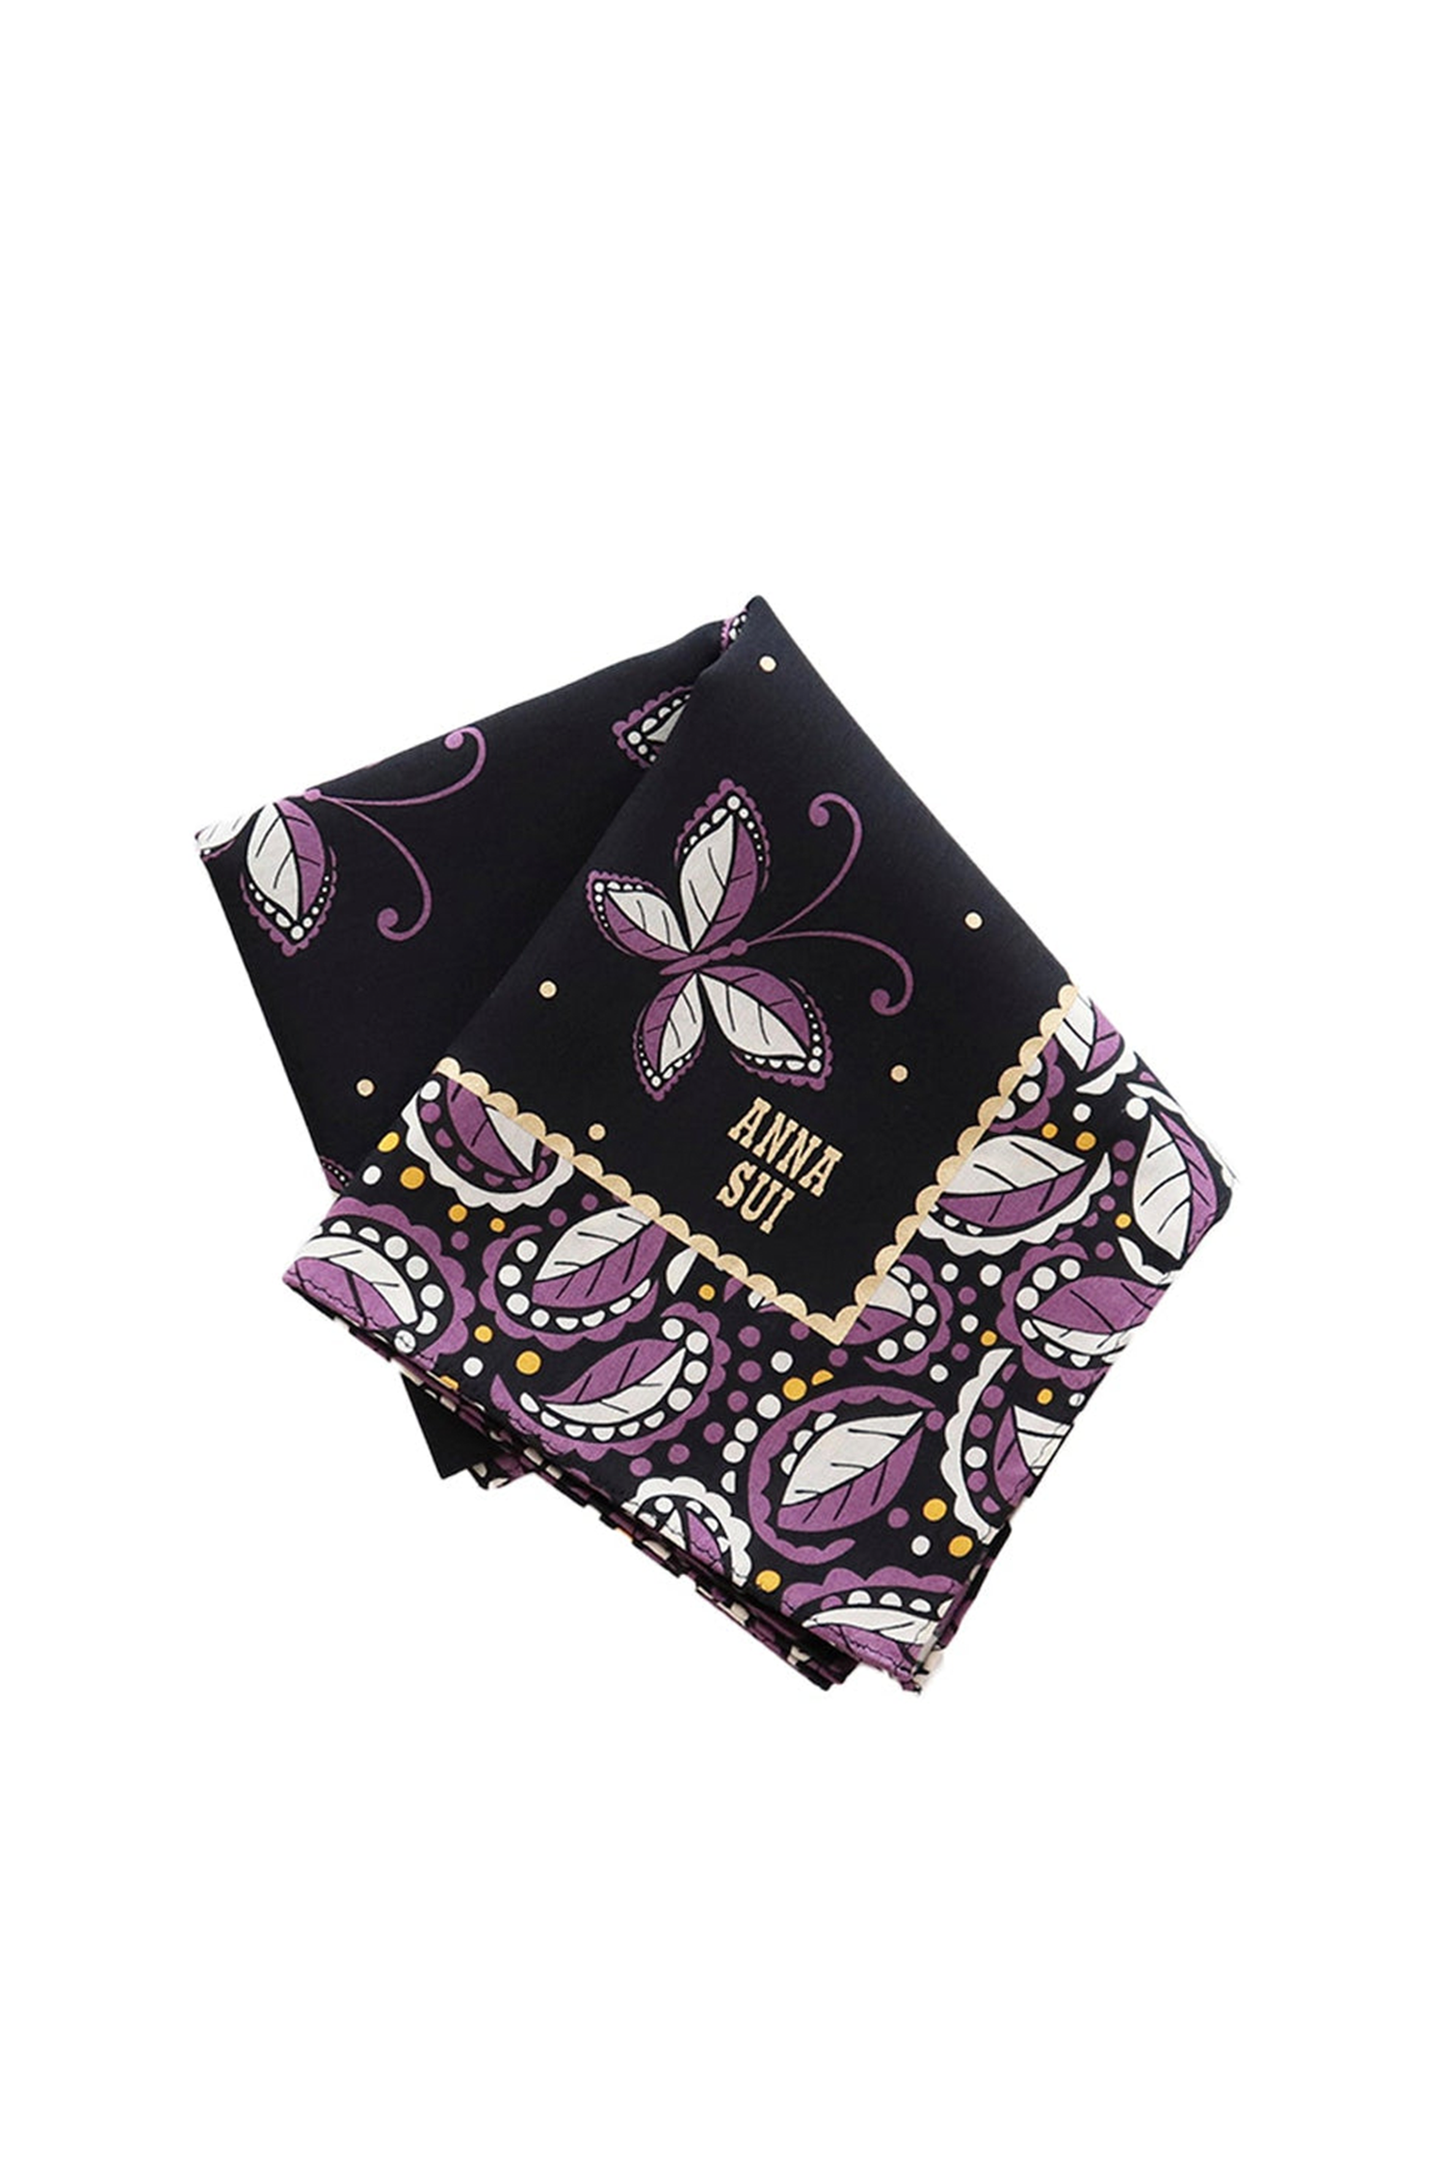 Handkerchief, black with white/brown butterfly and beige Anna Sui, large floral hue of purple border